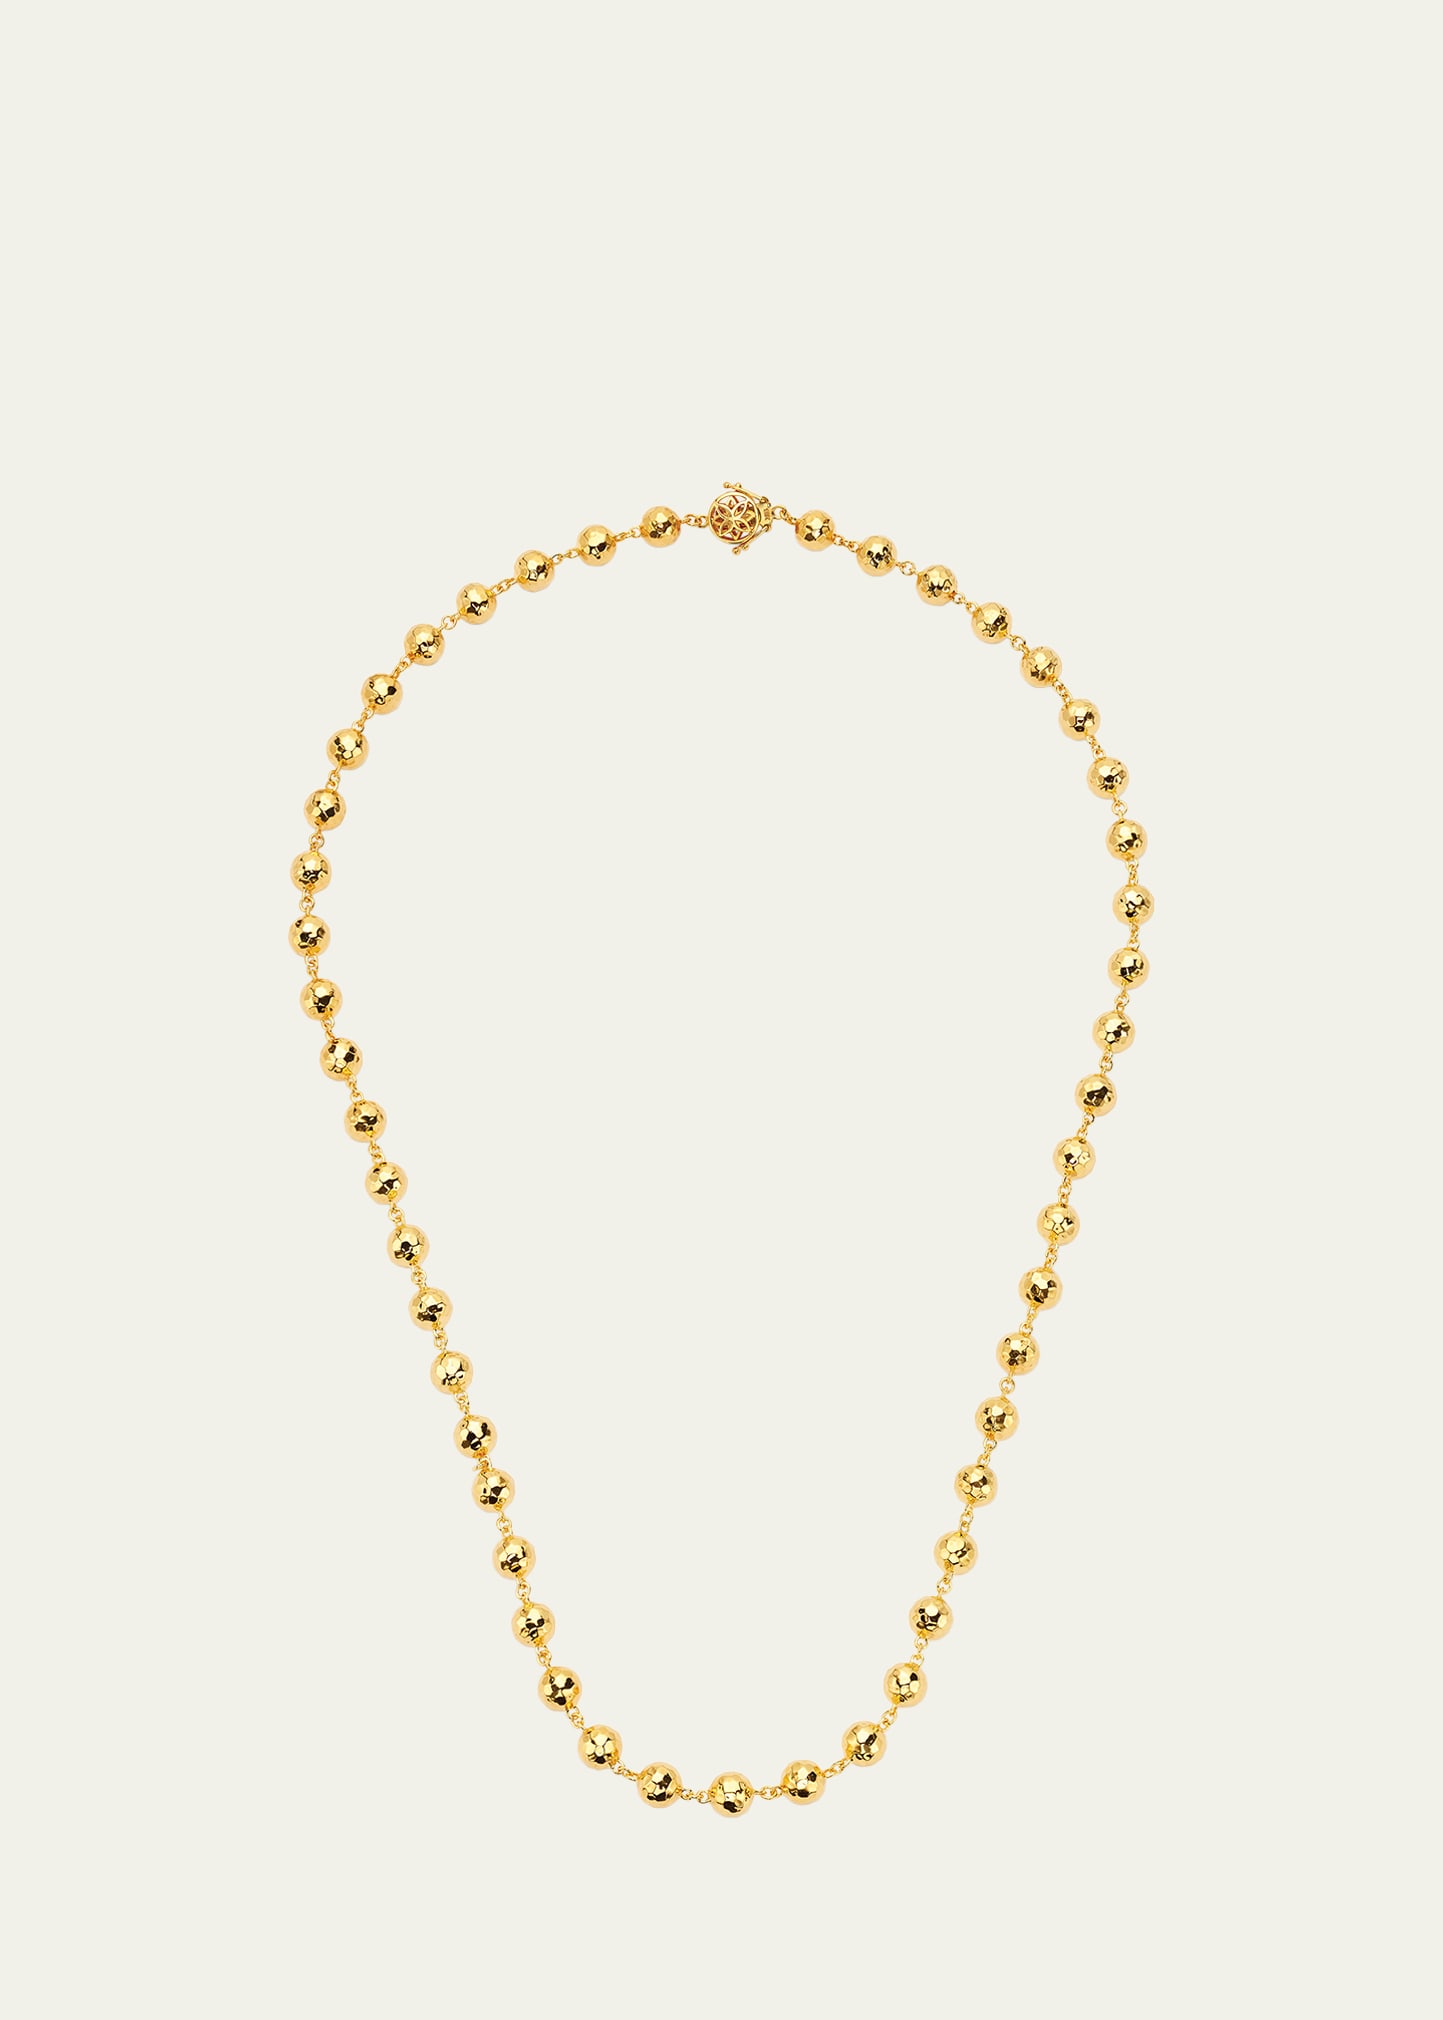 Buddha Mama Kids' 20k Hammered Ball Chain Necklace, 24"l In Gold